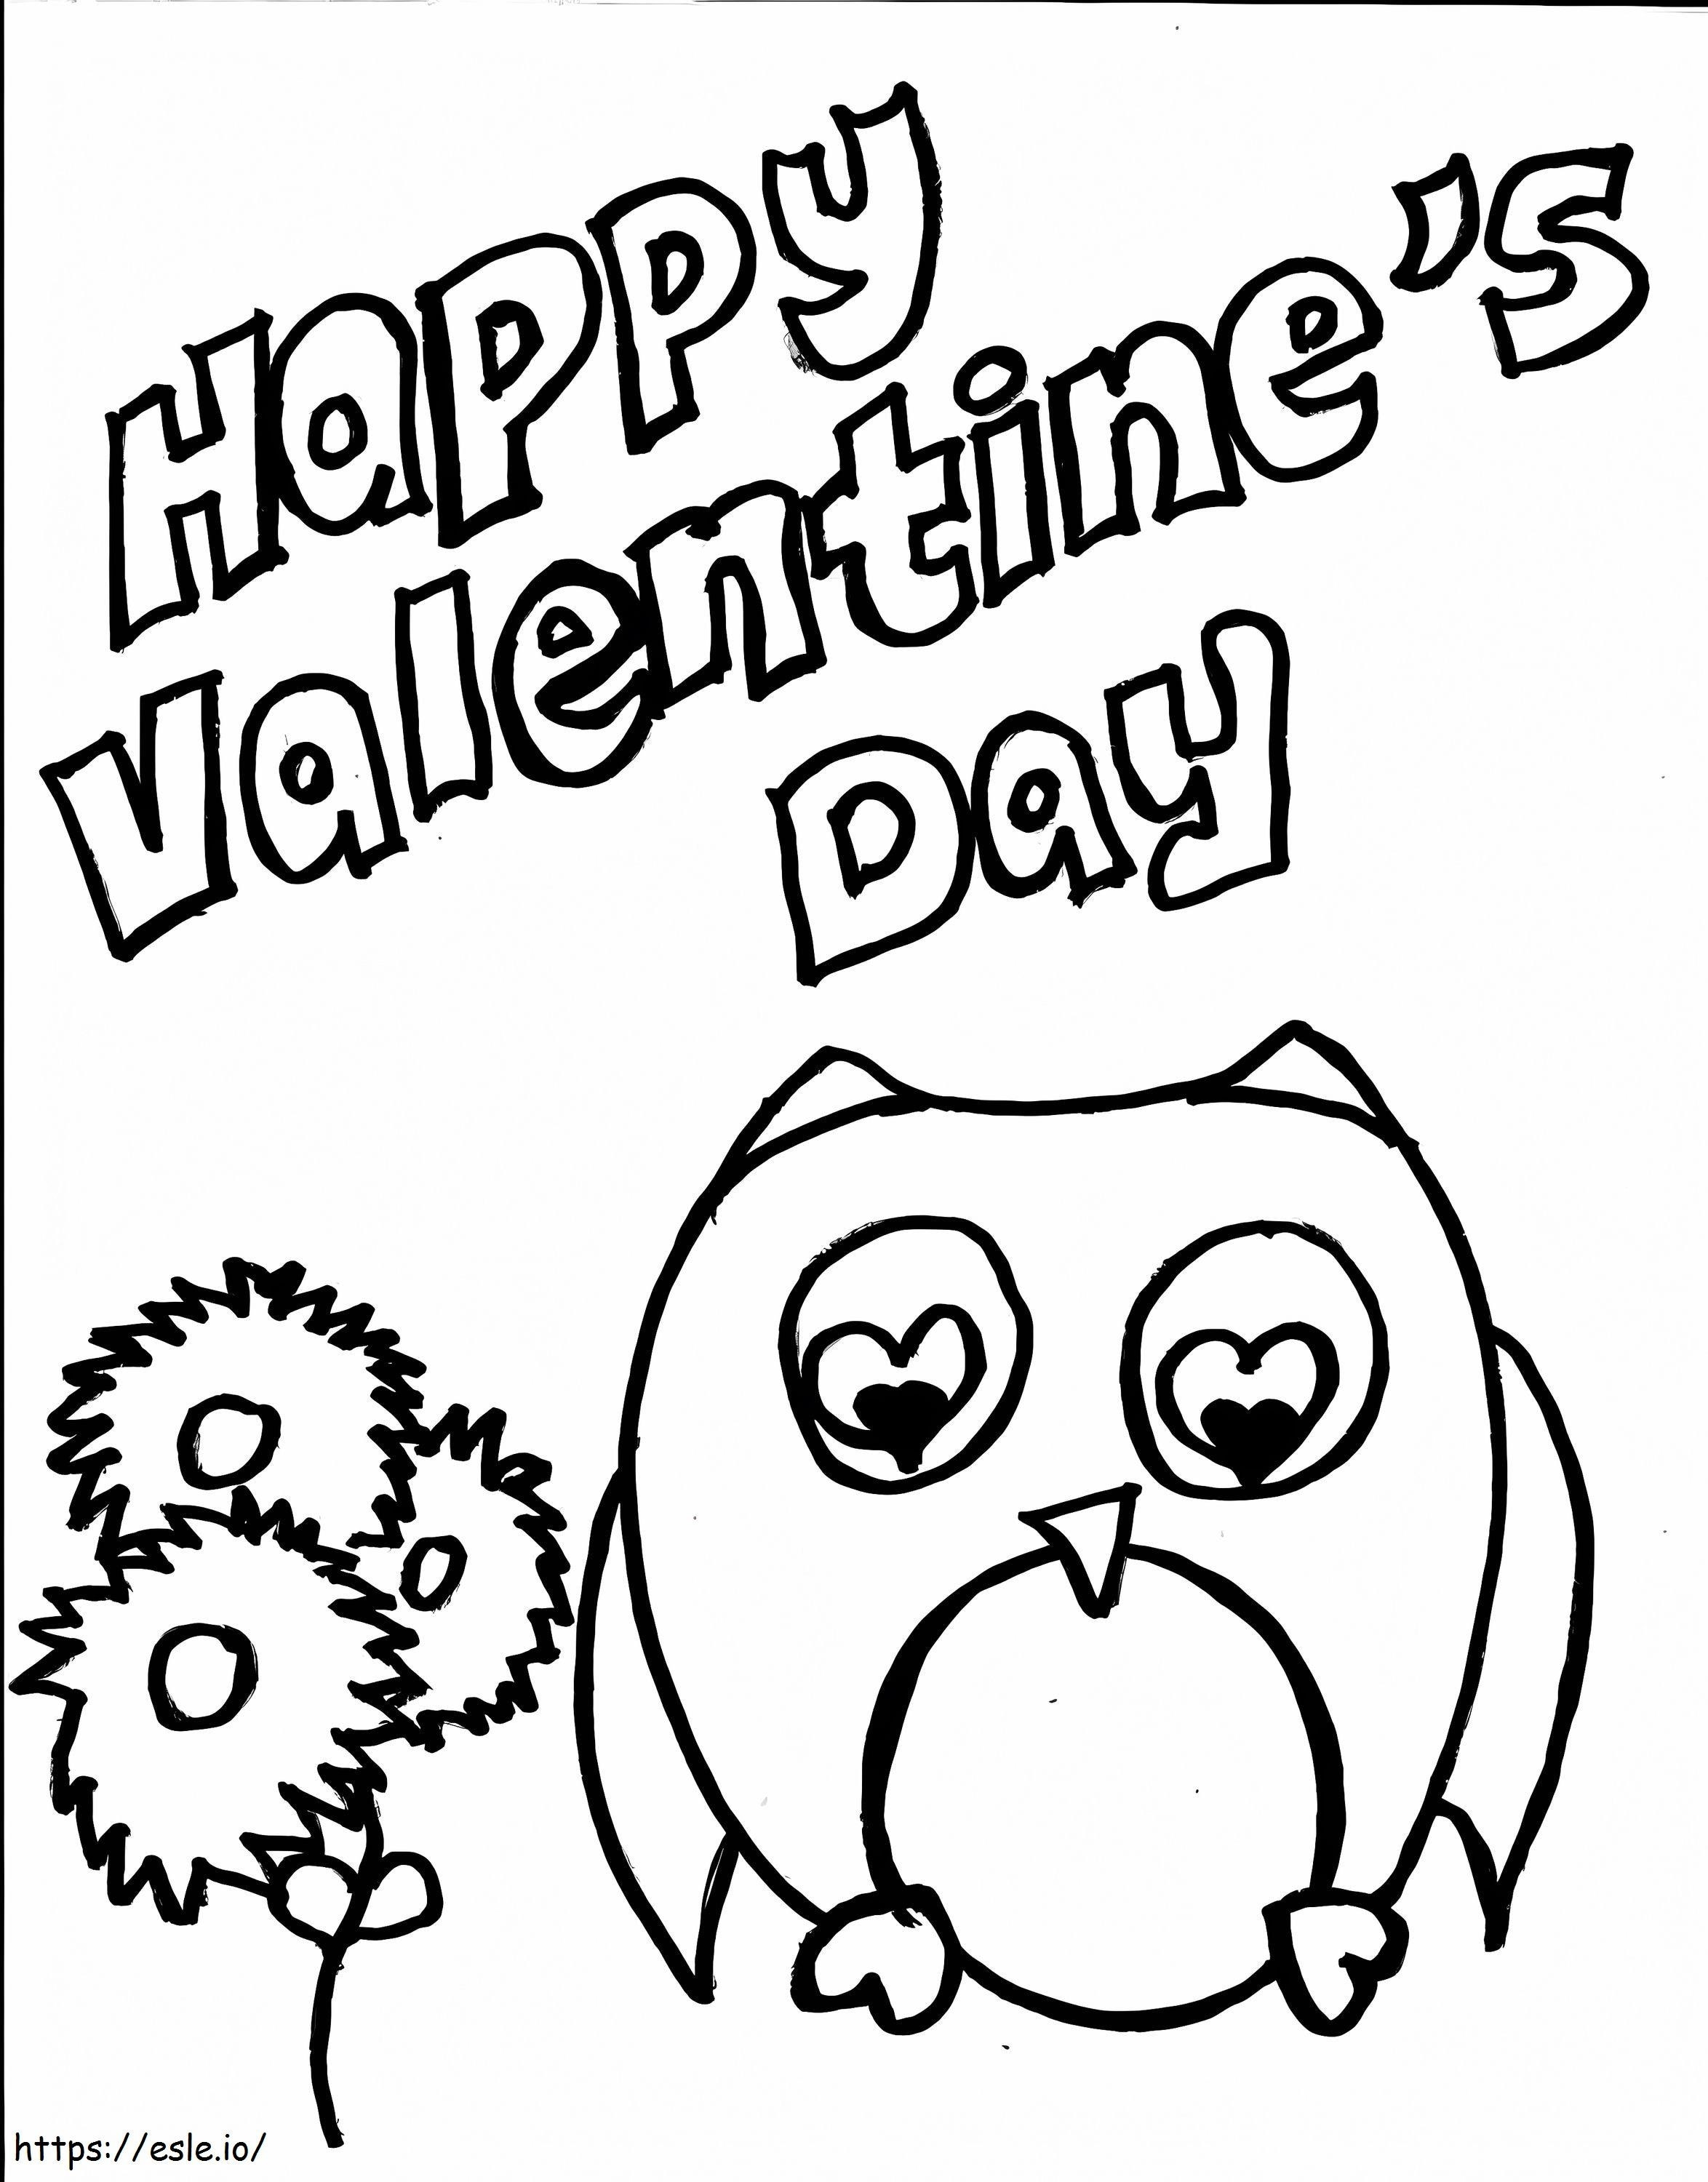 Happy Valentines Day coloring page